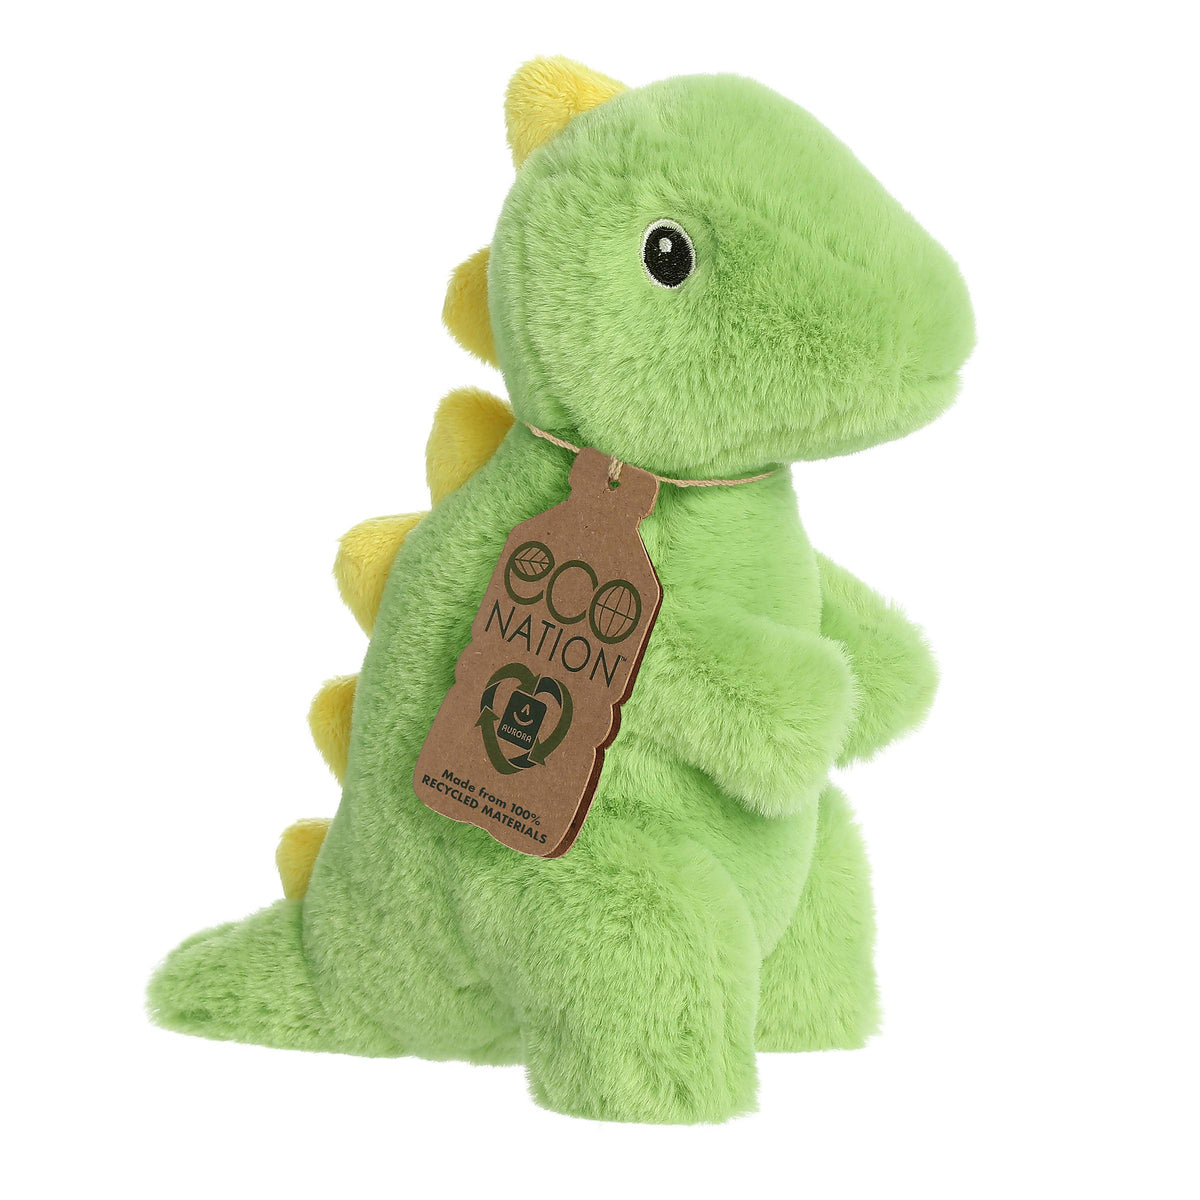 A captivating dino T-rex plush with a lime green body and yellow spikes, embroidered eyes, and an eco-nation tag